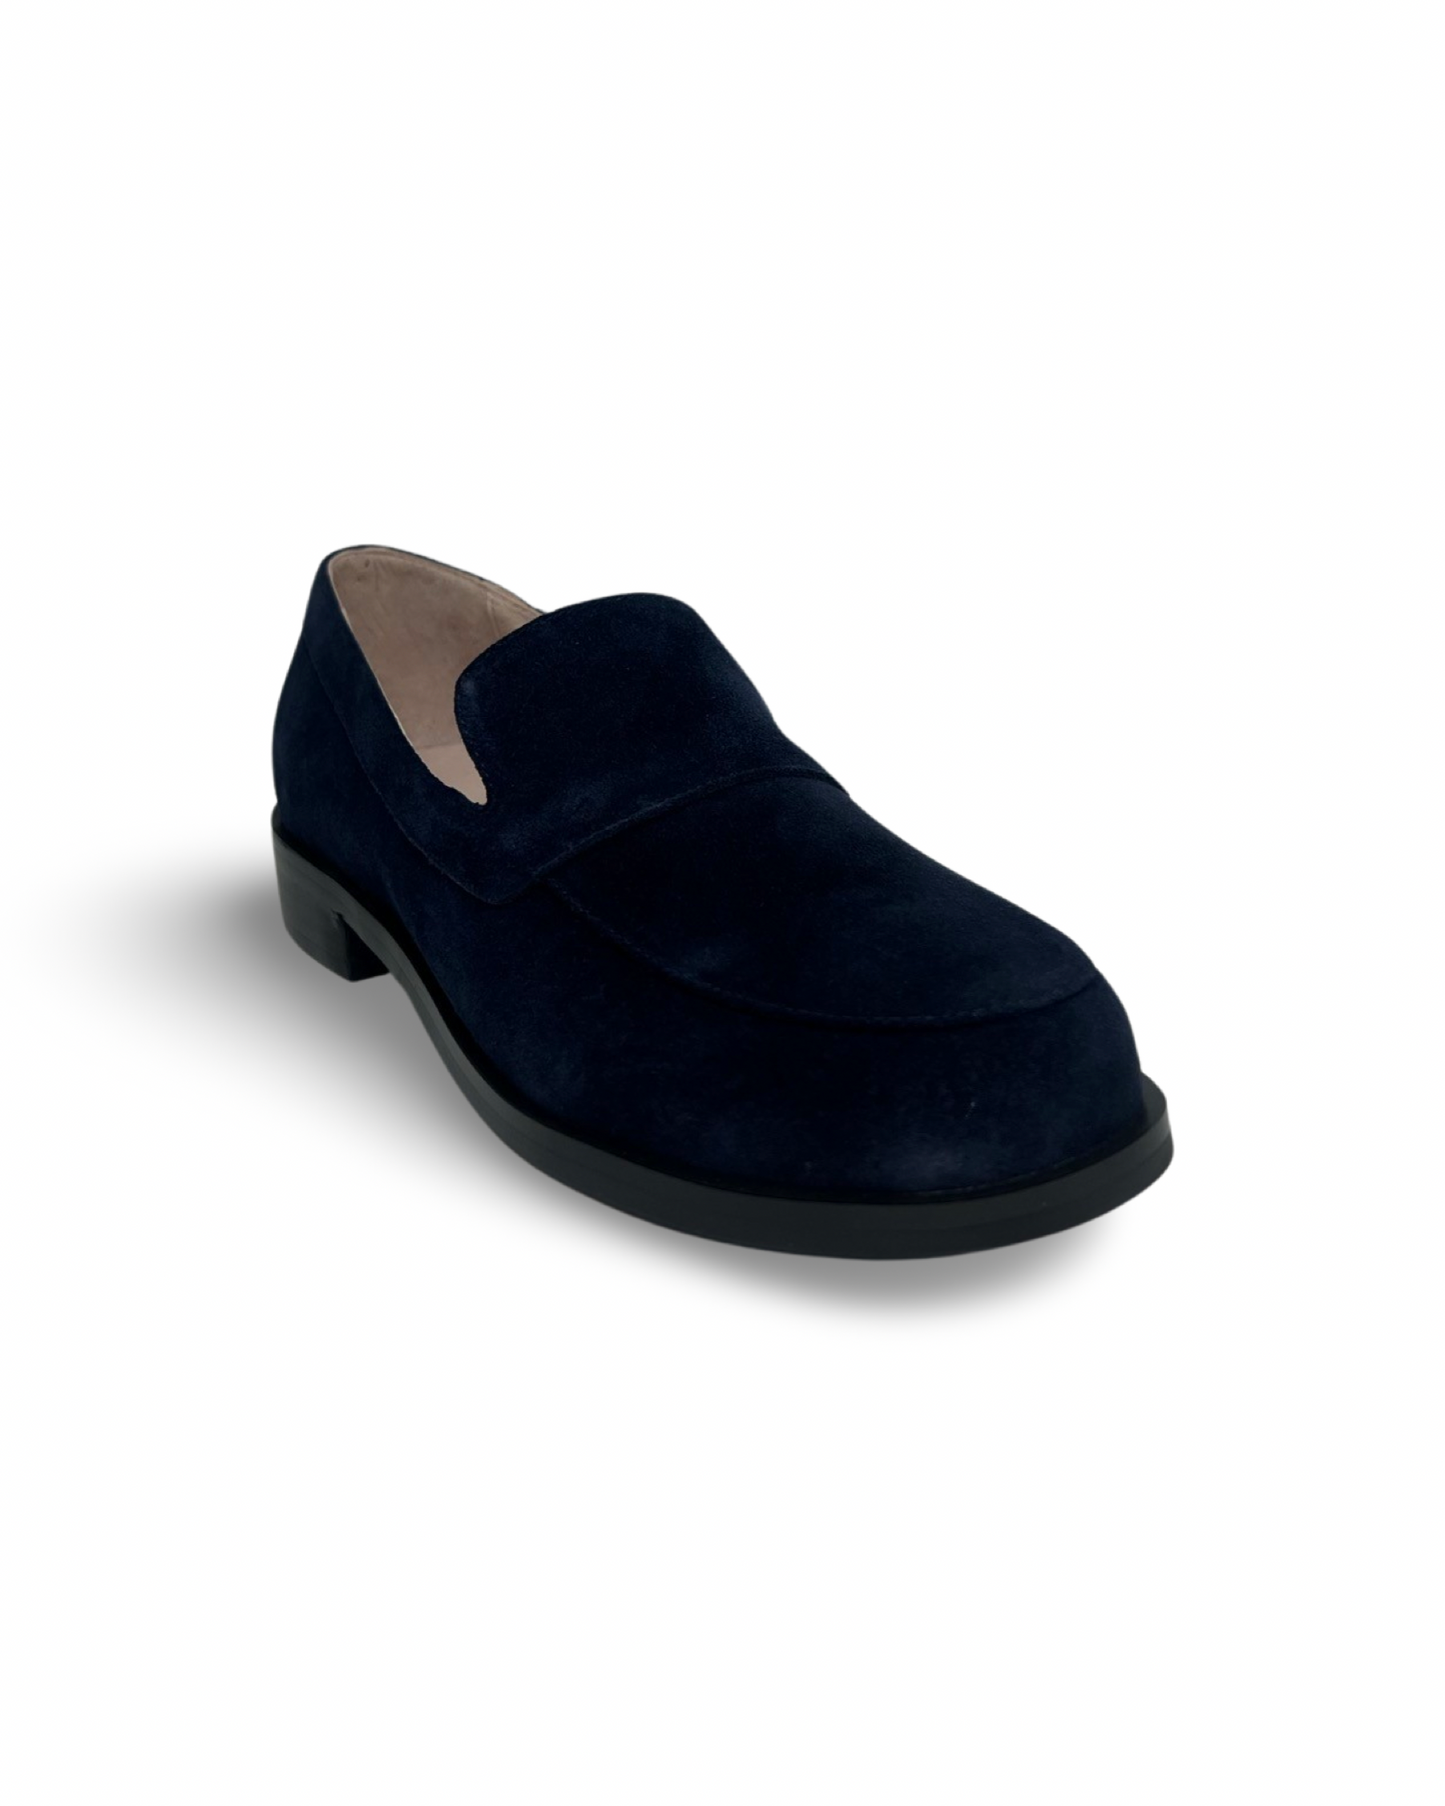 Hudson Loafer By Andrea Biani